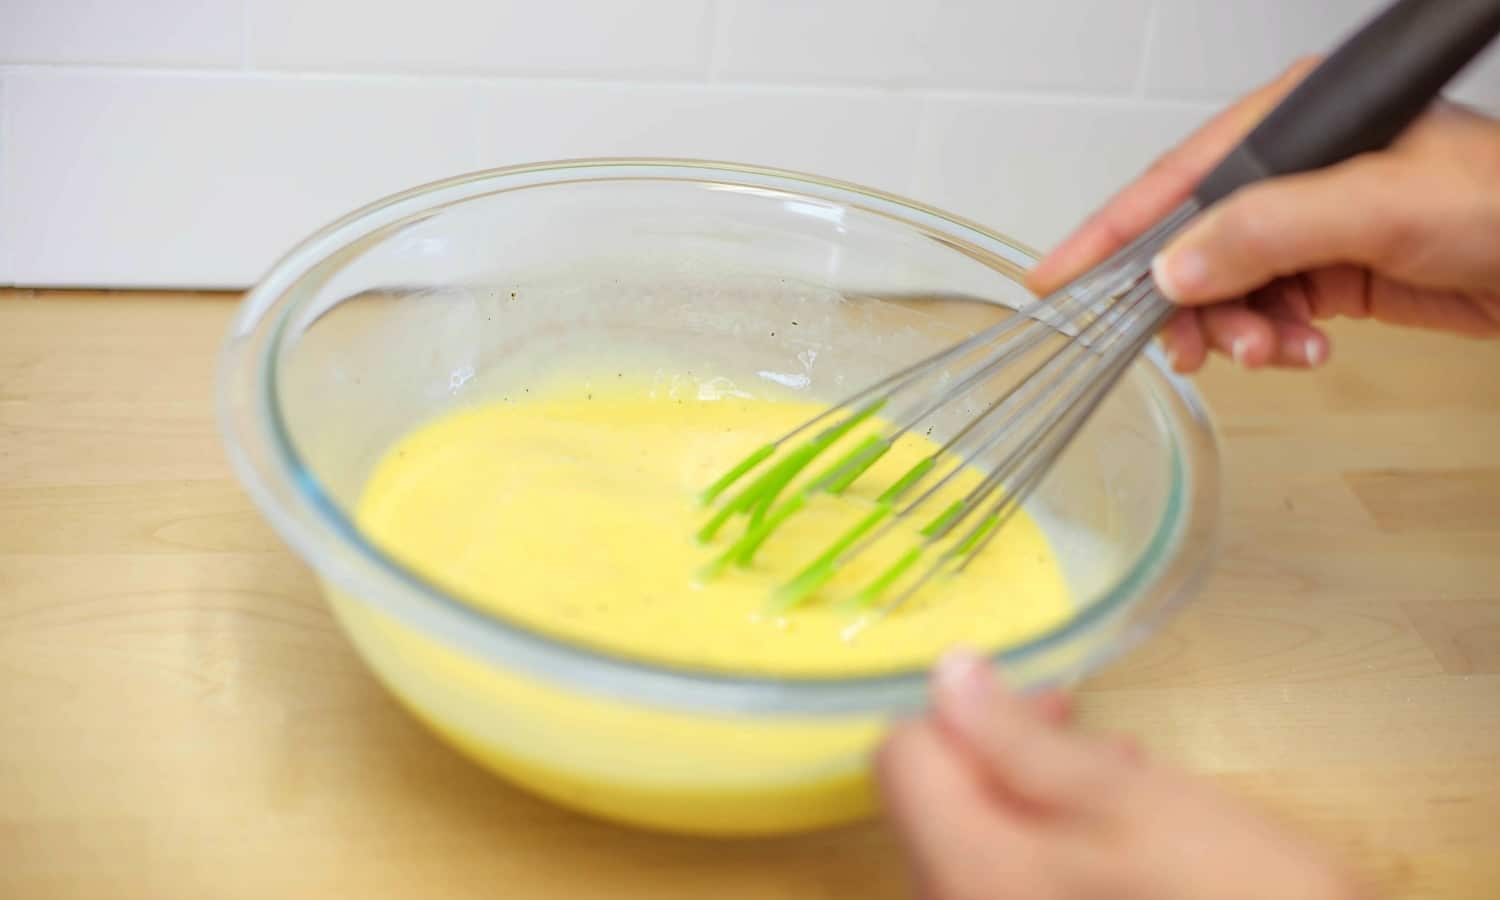 Season and whisk eggs in a bowl